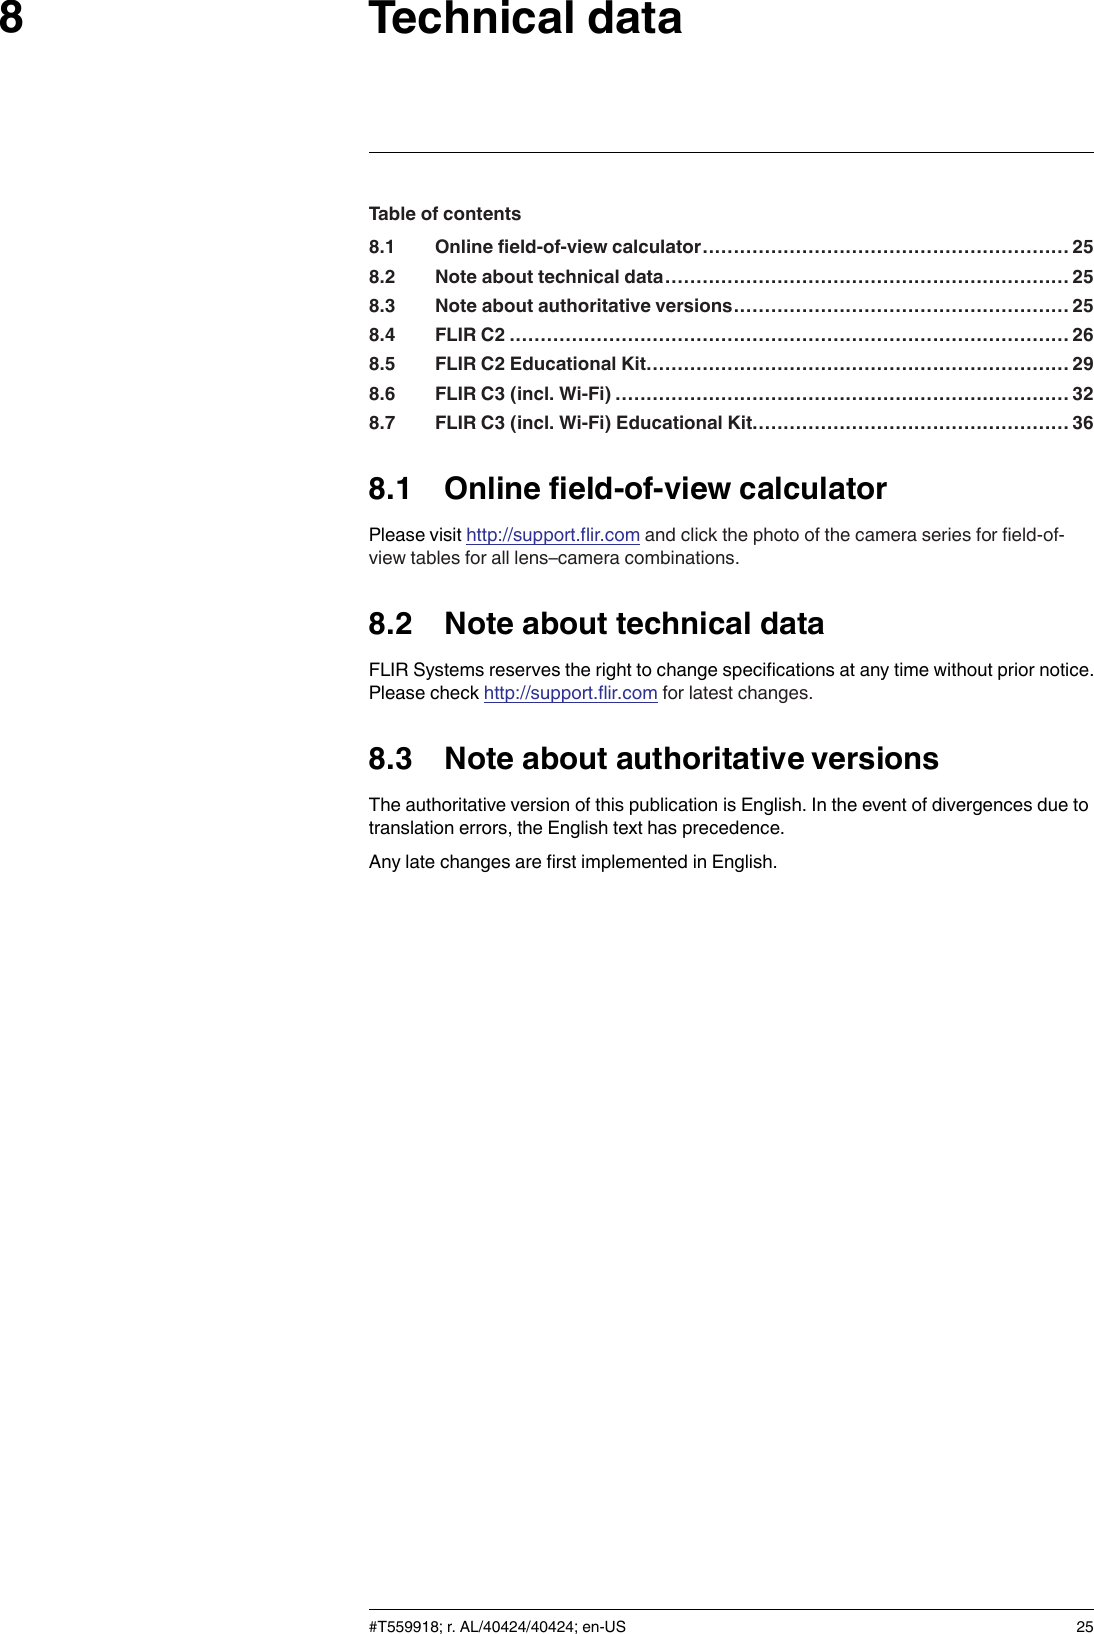 Technical data8Table of contents8.1 Online field-of-view calculator........................................................... 258.2 Note about technical data................................................................. 258.3 Note about authoritative versions...................................................... 258.4 FLIR C2 ..........................................................................................268.5 FLIR C2 Educational Kit.................................................................... 298.6 FLIR C3 (incl. Wi-Fi) ......................................................................... 328.7 FLIR C3 (incl. Wi-Fi) Educational Kit................................................... 368.1 Online field-of-view calculatorPlease visit http://support.flir.com and click the photo of the camera series for field-of-view tables for all lens–camera combinations.8.2 Note about technical dataFLIR Systems reserves the right to change specifications at any time without prior notice.Please check http://support.flir.com for latest changes.8.3 Note about authoritative versionsThe authoritative version of this publication is English. In the event of divergences due totranslation errors, the English text has precedence.Any late changes are first implemented in English.#T559918; r. AL/40424/40424; en-US 25